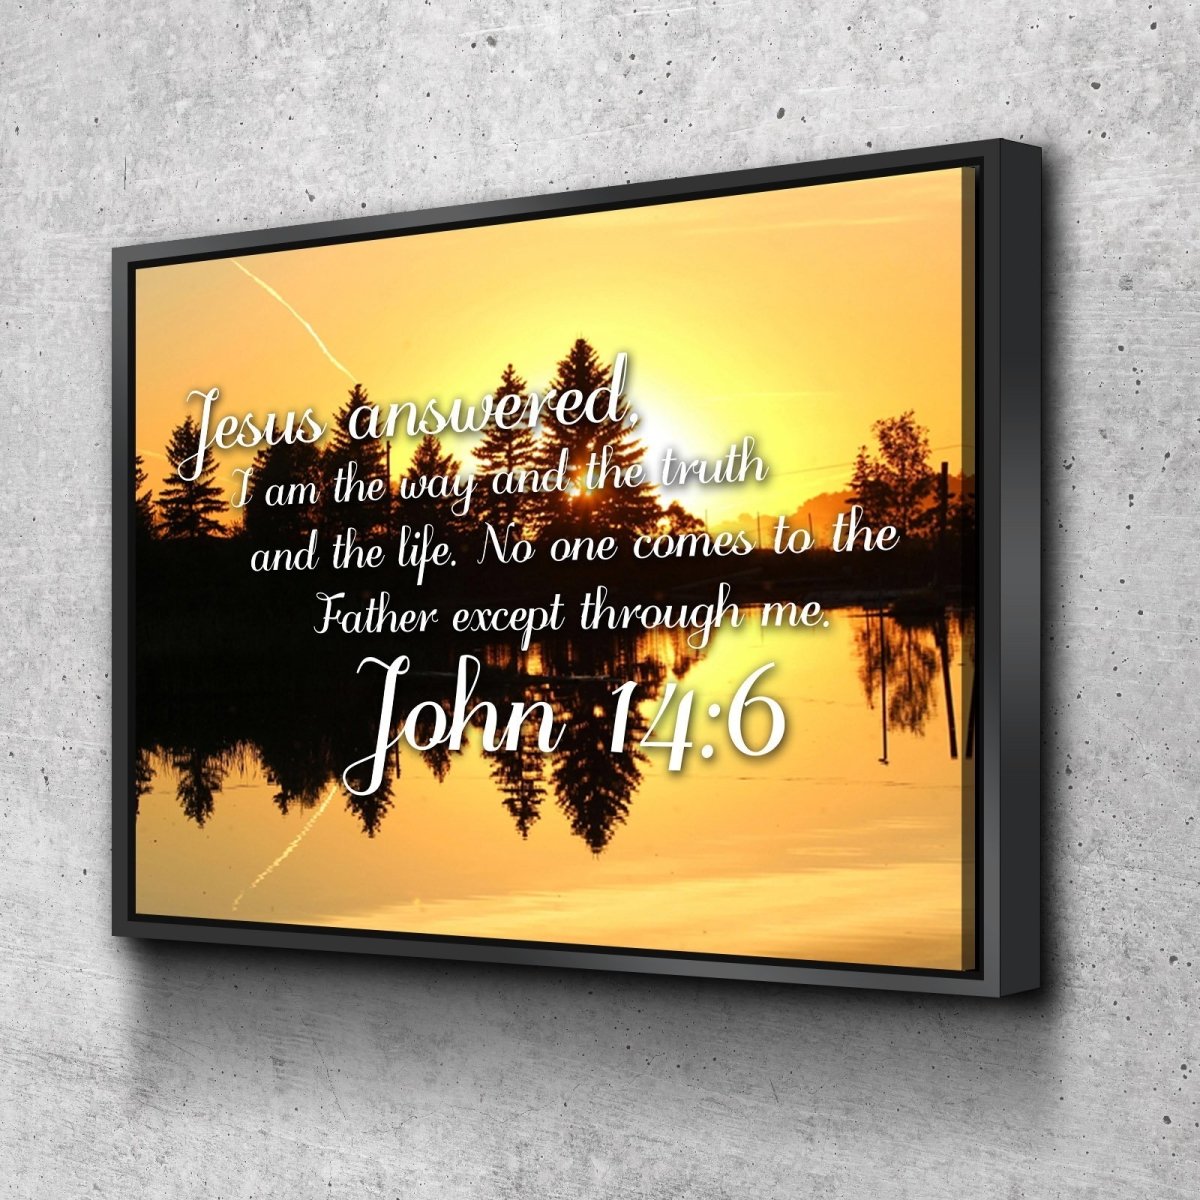 John 146 I Am The Way The Truth And The Life Wall Art Canvas Print - Christian Canvas Wall Art